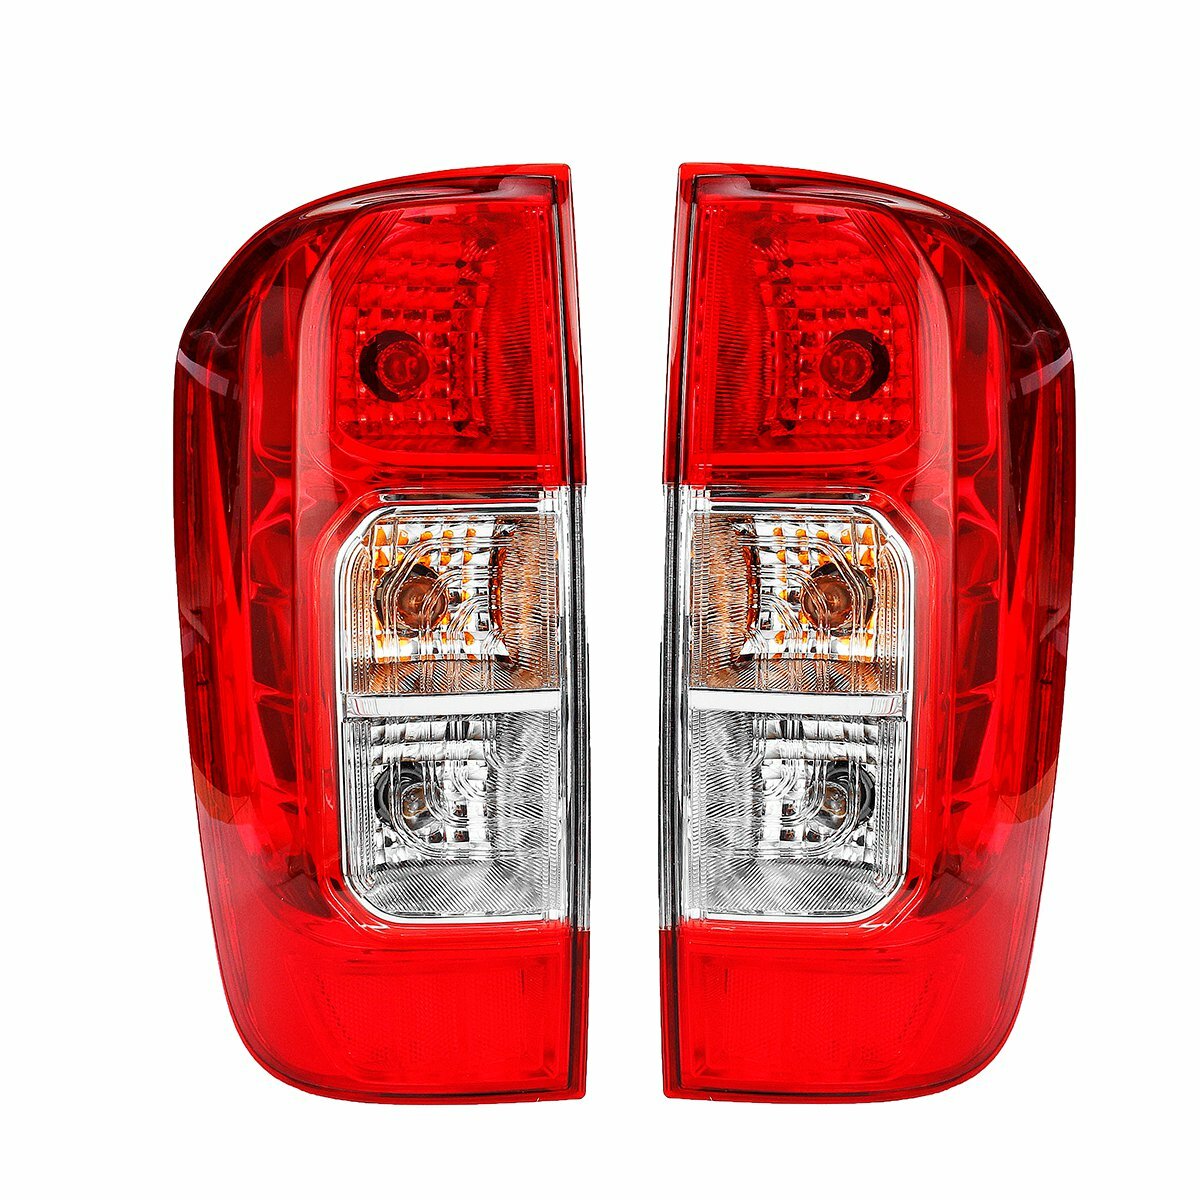 Car Rear Tail Light Red Left/Right with Bulb Wiring Harness for Nissan Navara NP300 D23 2015-2019